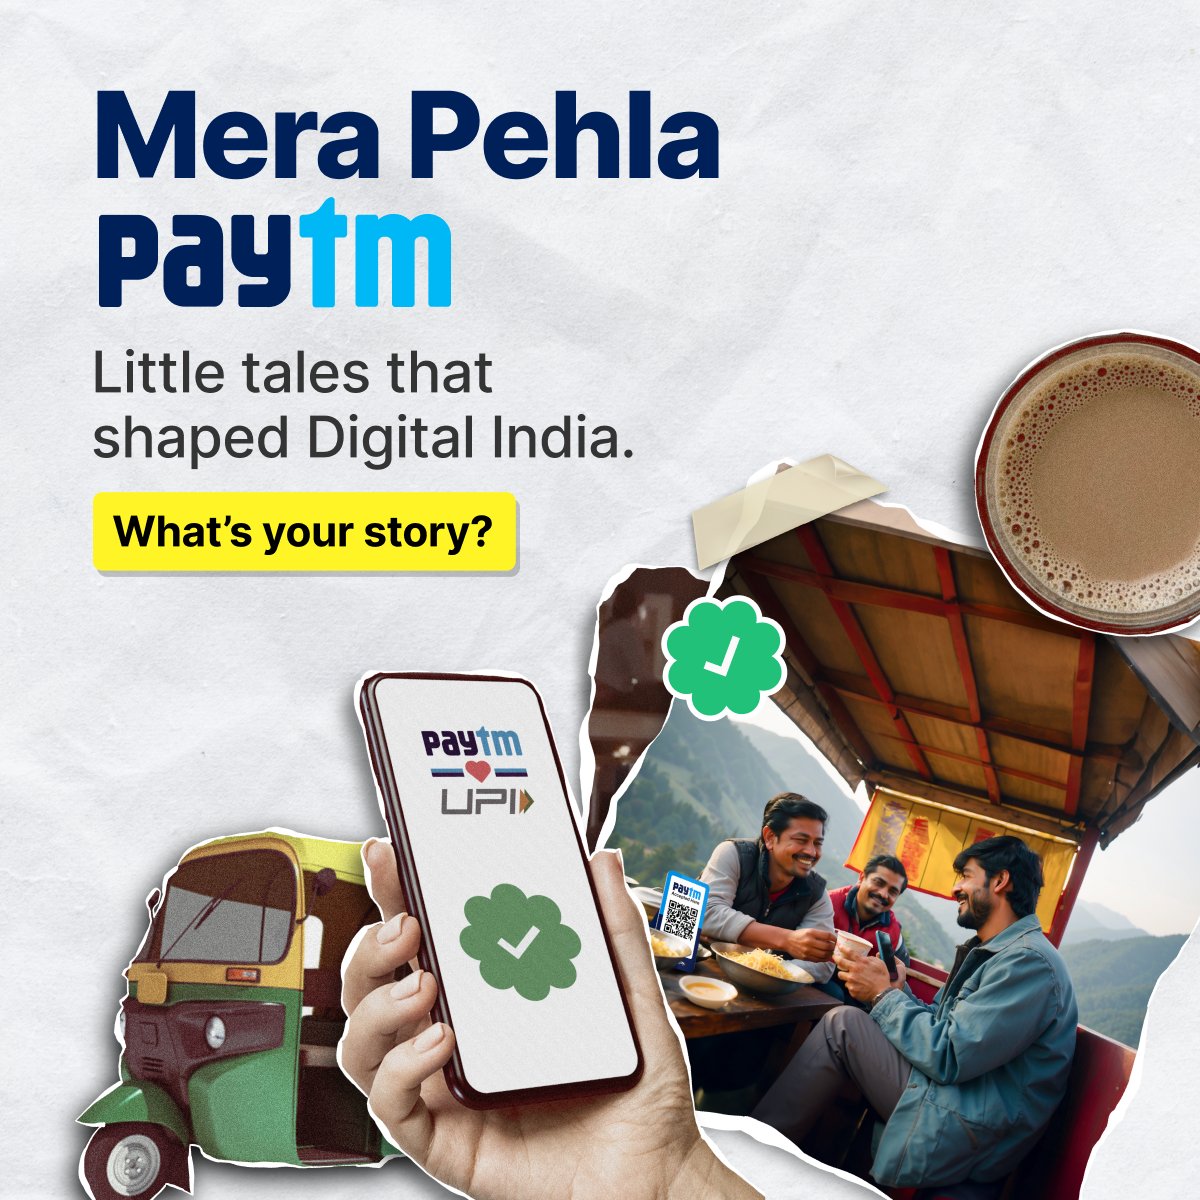 Your Paytm story can win you an iPhone and Insider Tickets worth 10,000 😮 Buying chai or splitting bills. Those simple tales shaped Digital India. Share yours using #MeraPehlaPaytm via comments or a video below 💫